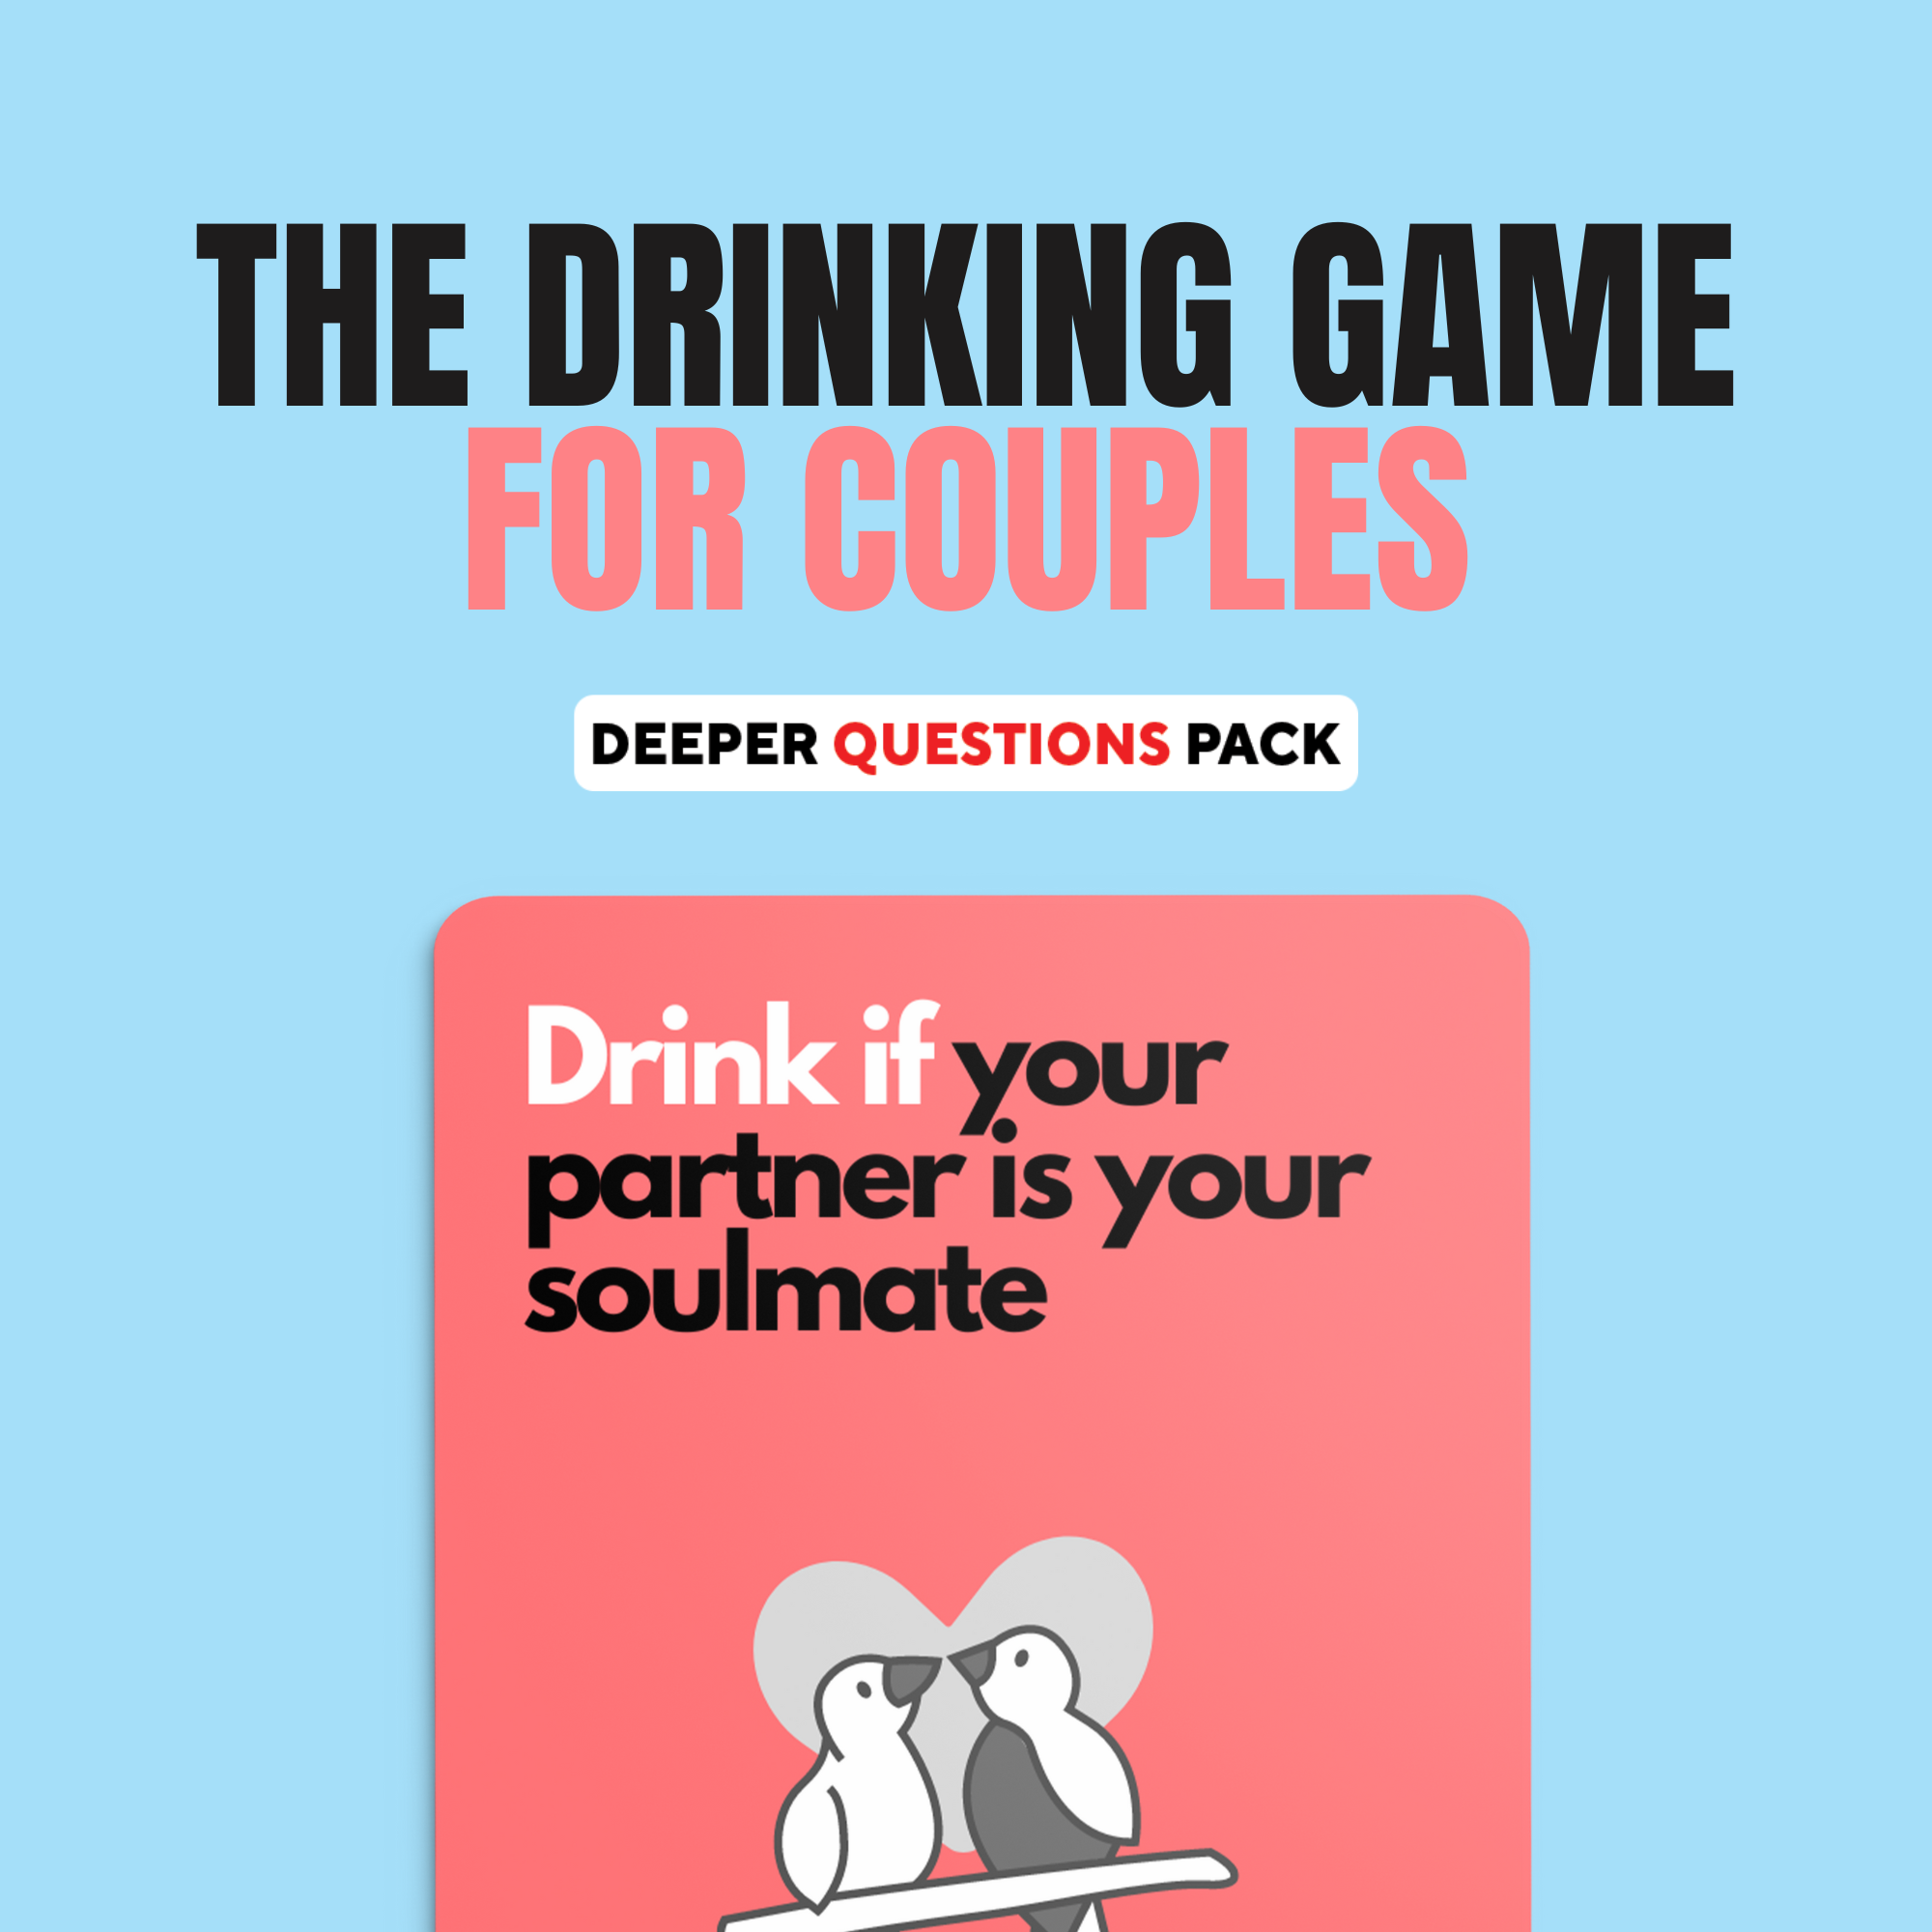 Dizzy Date - Deeper Questions Expansion Pack